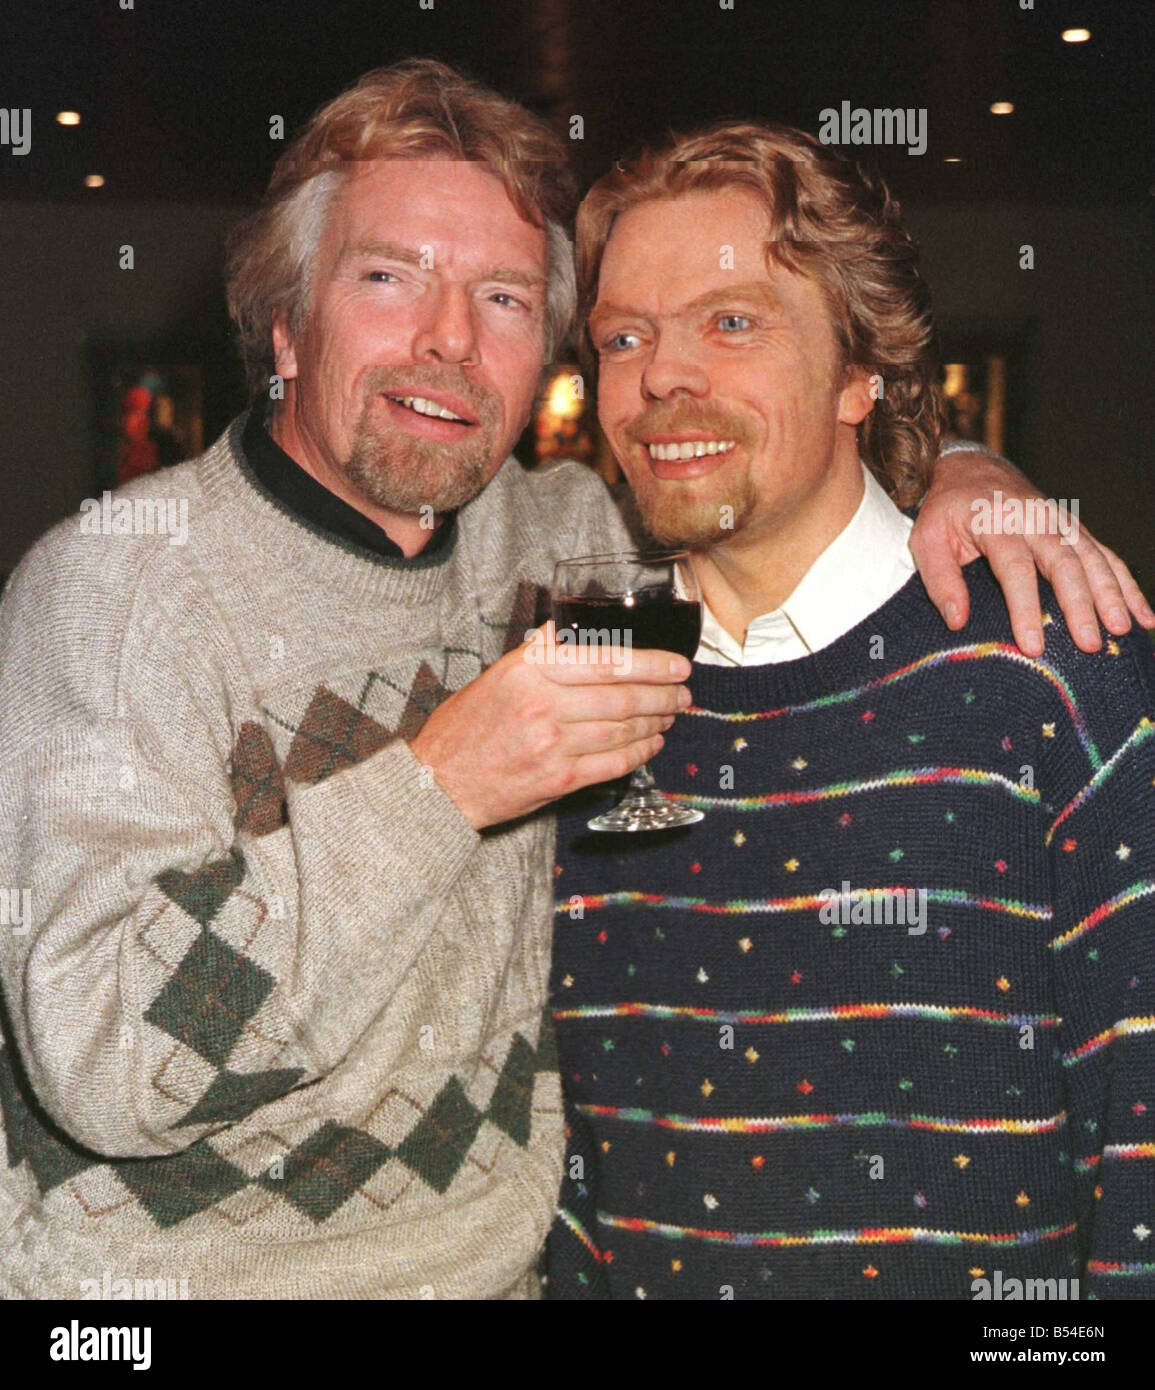 Richard Branson meets Richard Branson March 1998 in the Virgin Club House lounge at Heathrow Airport Richard was flying out to South Africa when he came face to face with himself The other Richard is the Madame Tussauds variety which is on loan from the famous waxworks for a few weeks on display in the Virgin lounge Stock Photo